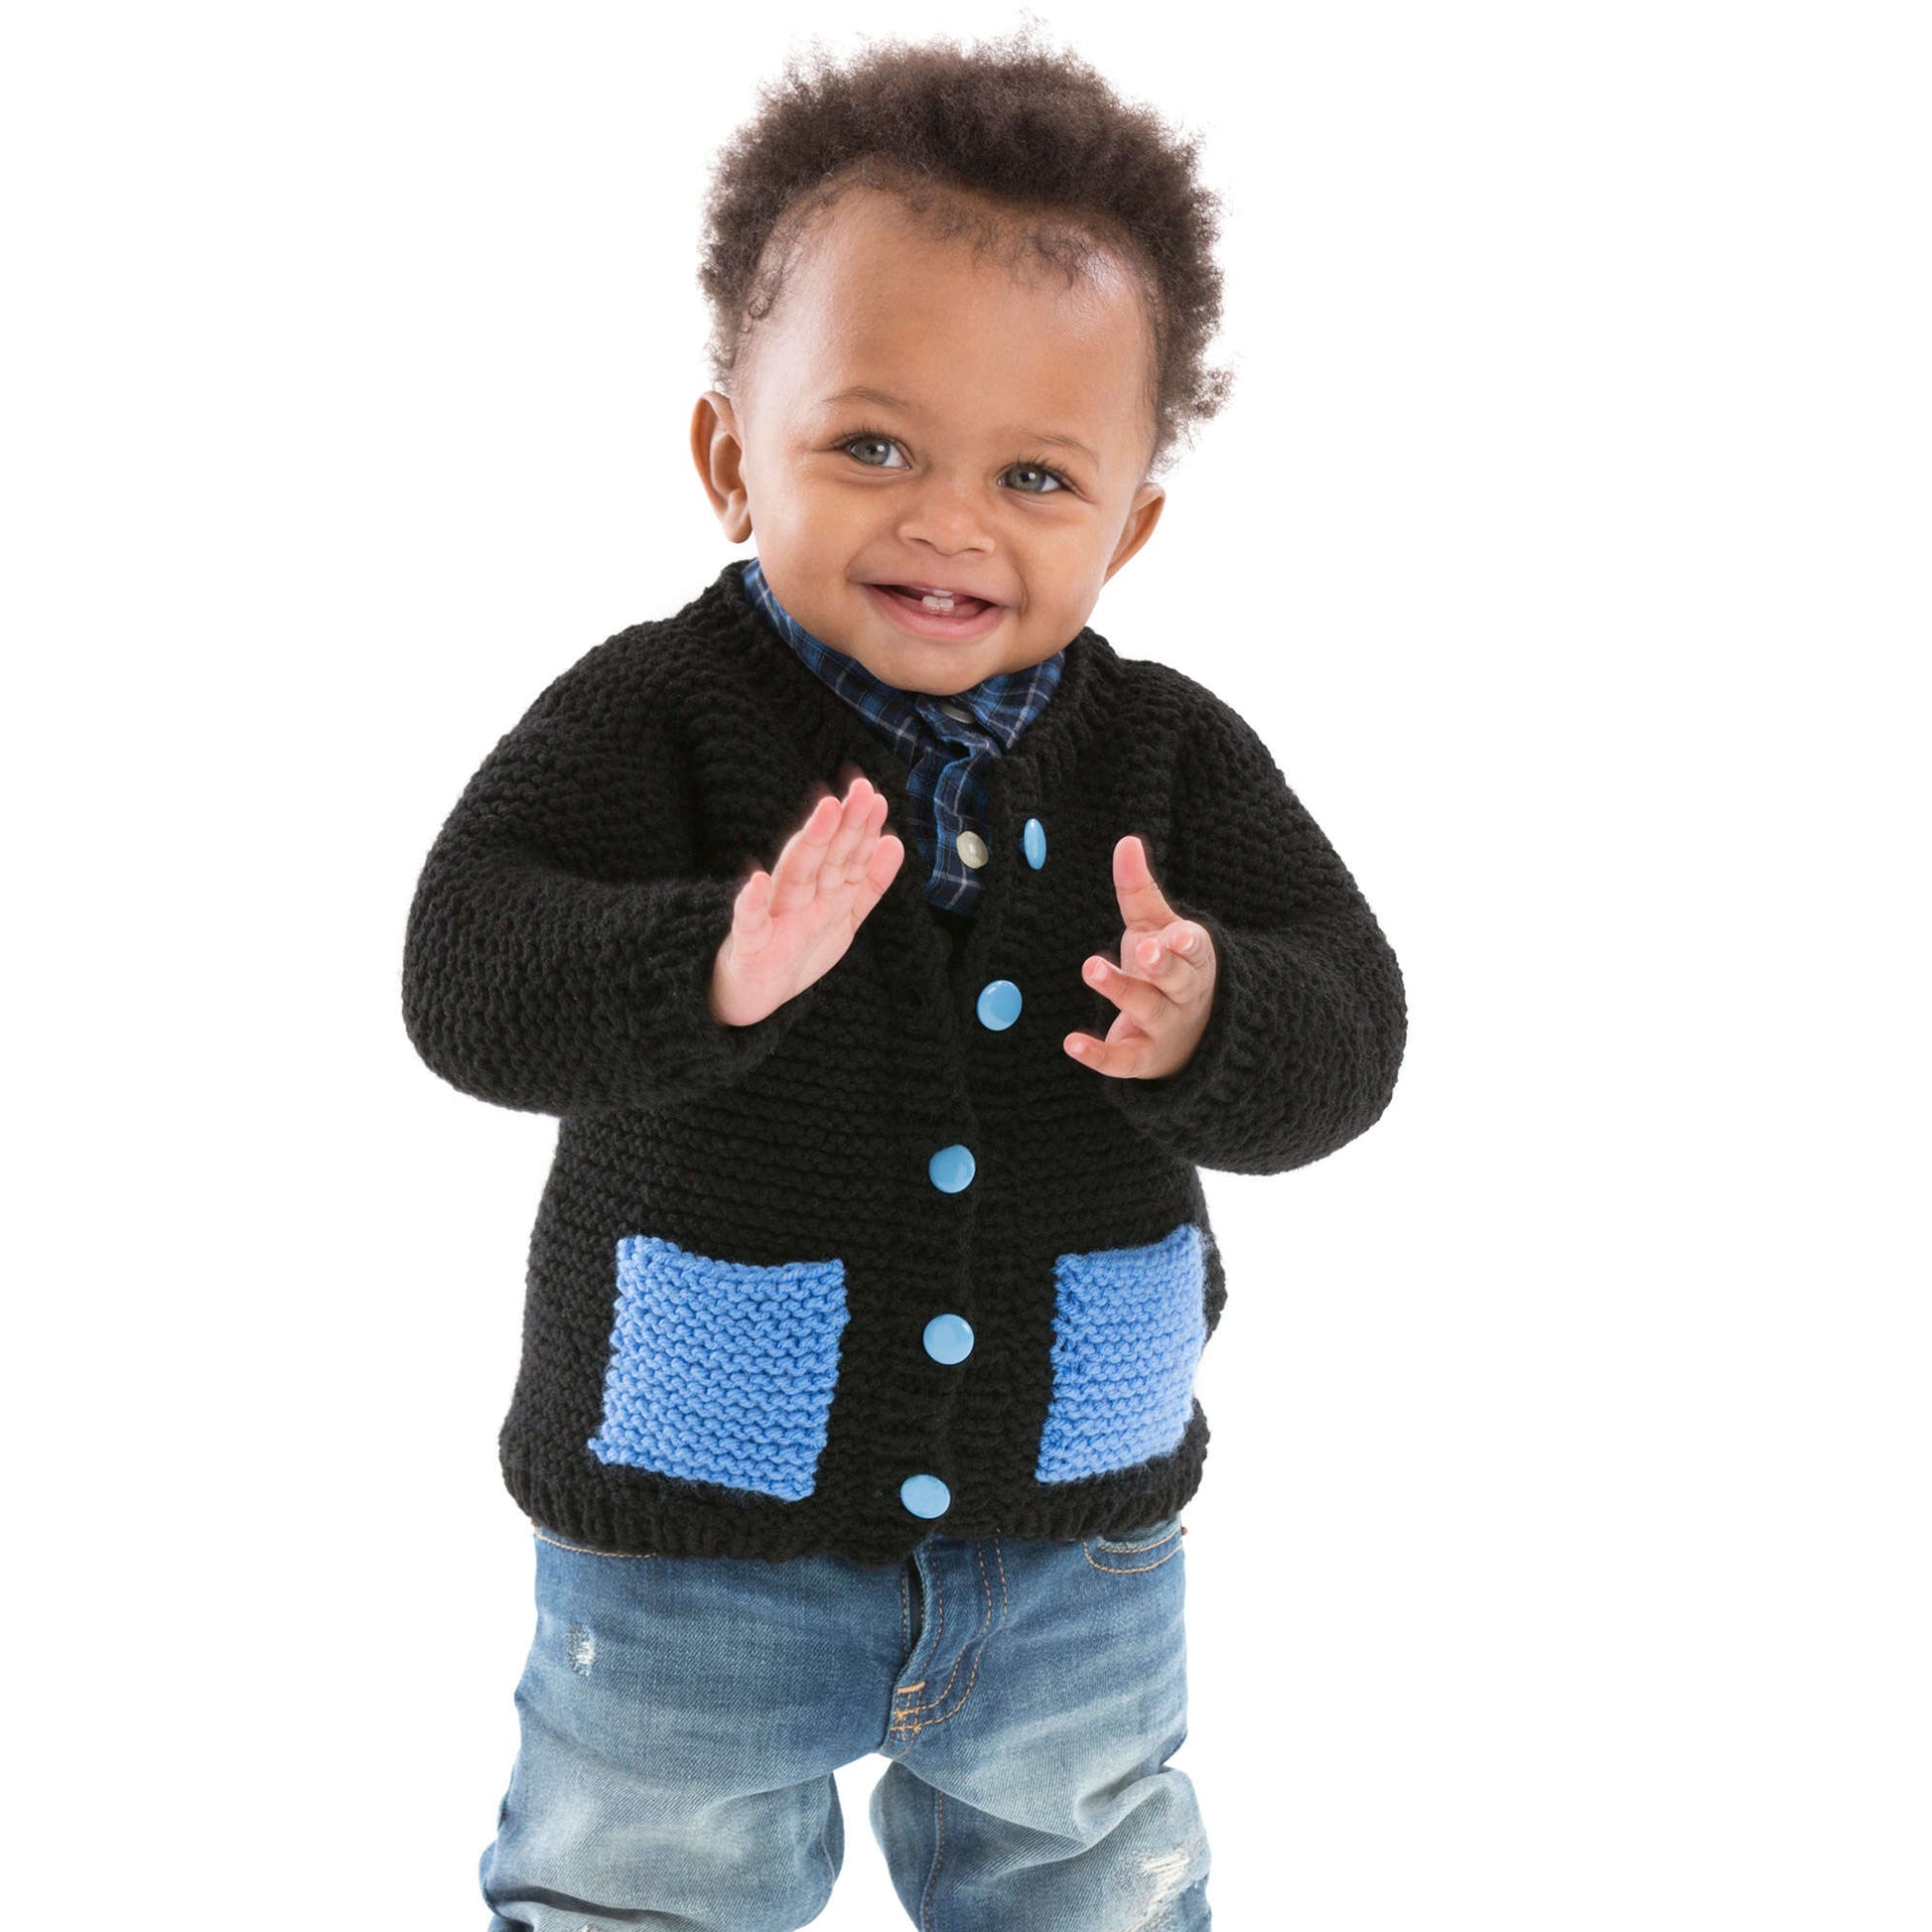 Red Heart Cute & Classic Baby Knit Cardigan | Yarnspirations